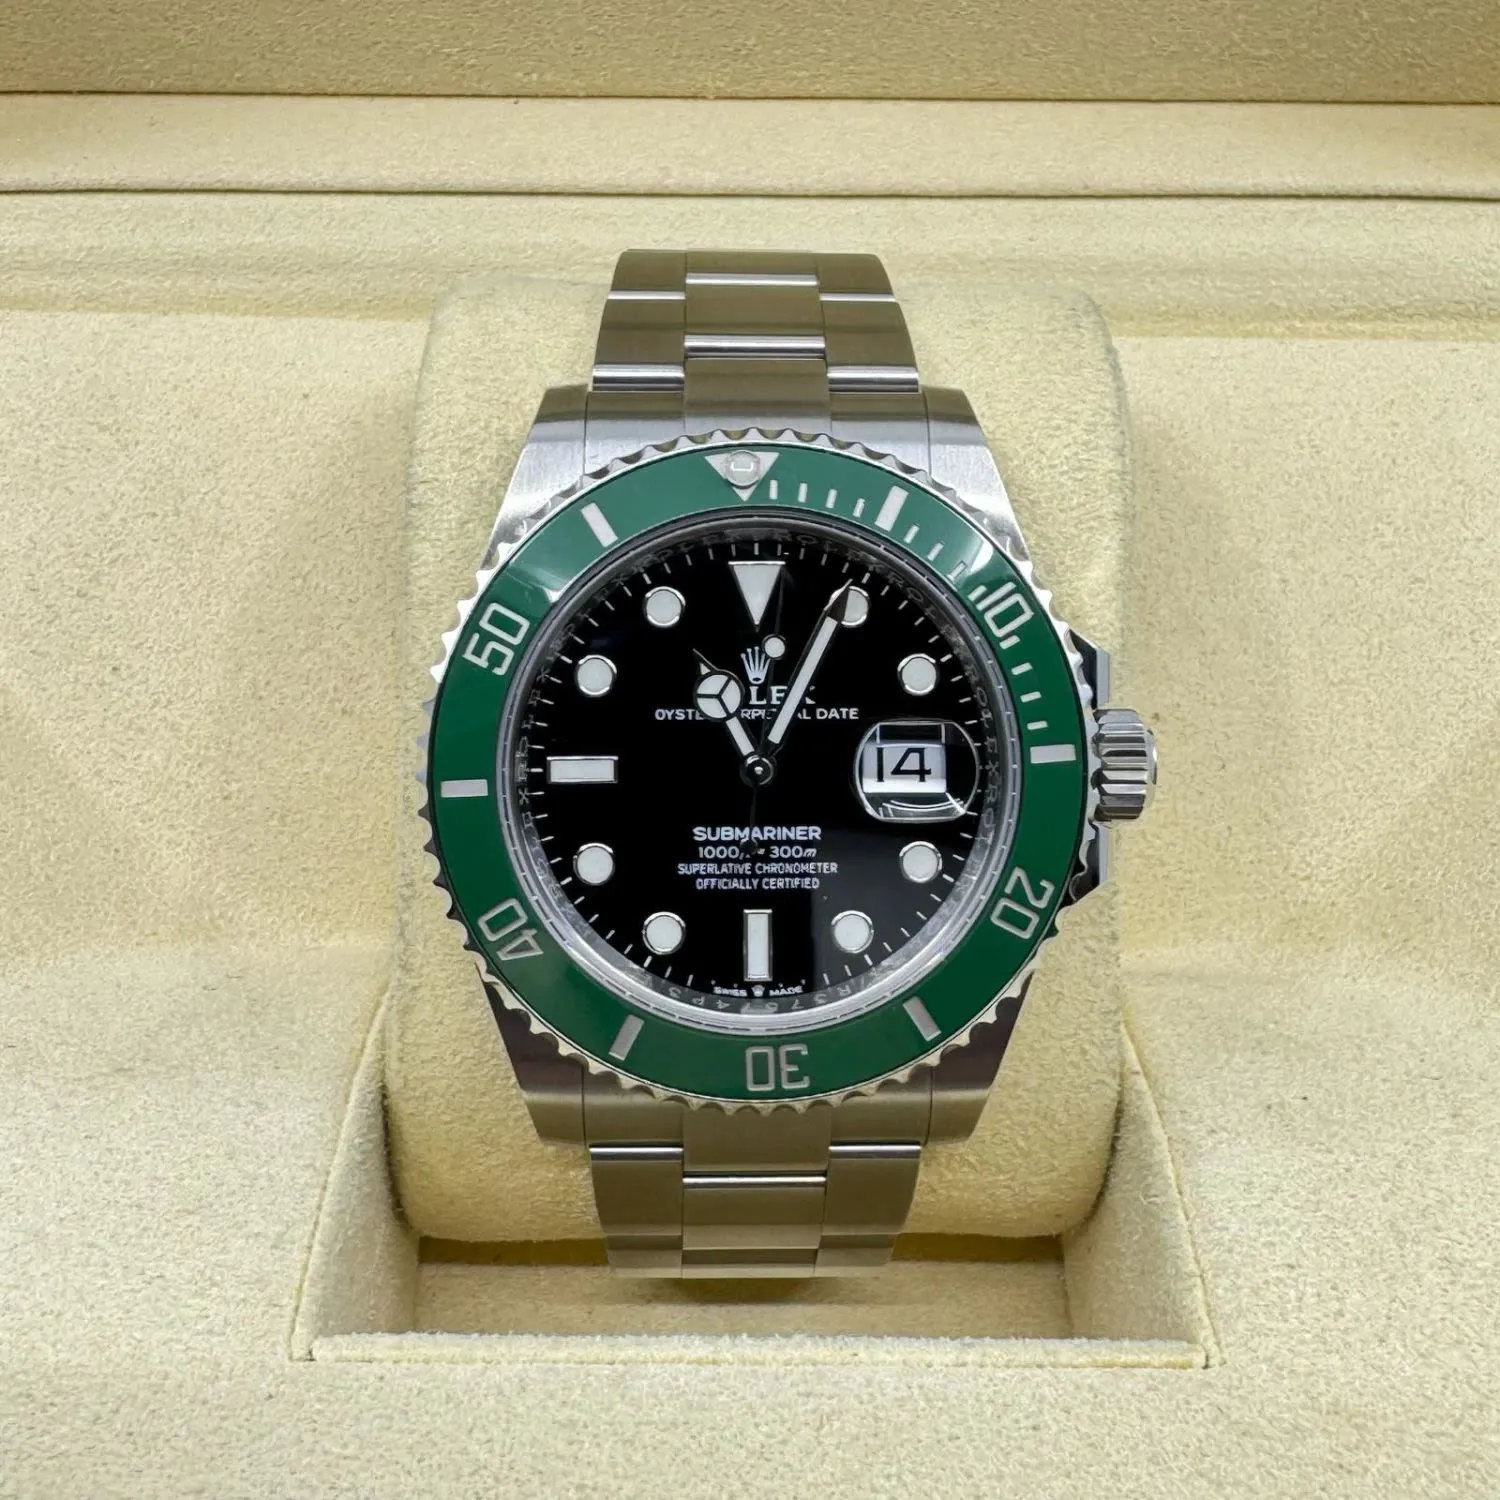 Rolex Submariner Date 1266100LV 41mm Stainless steel and ceramic Black 1